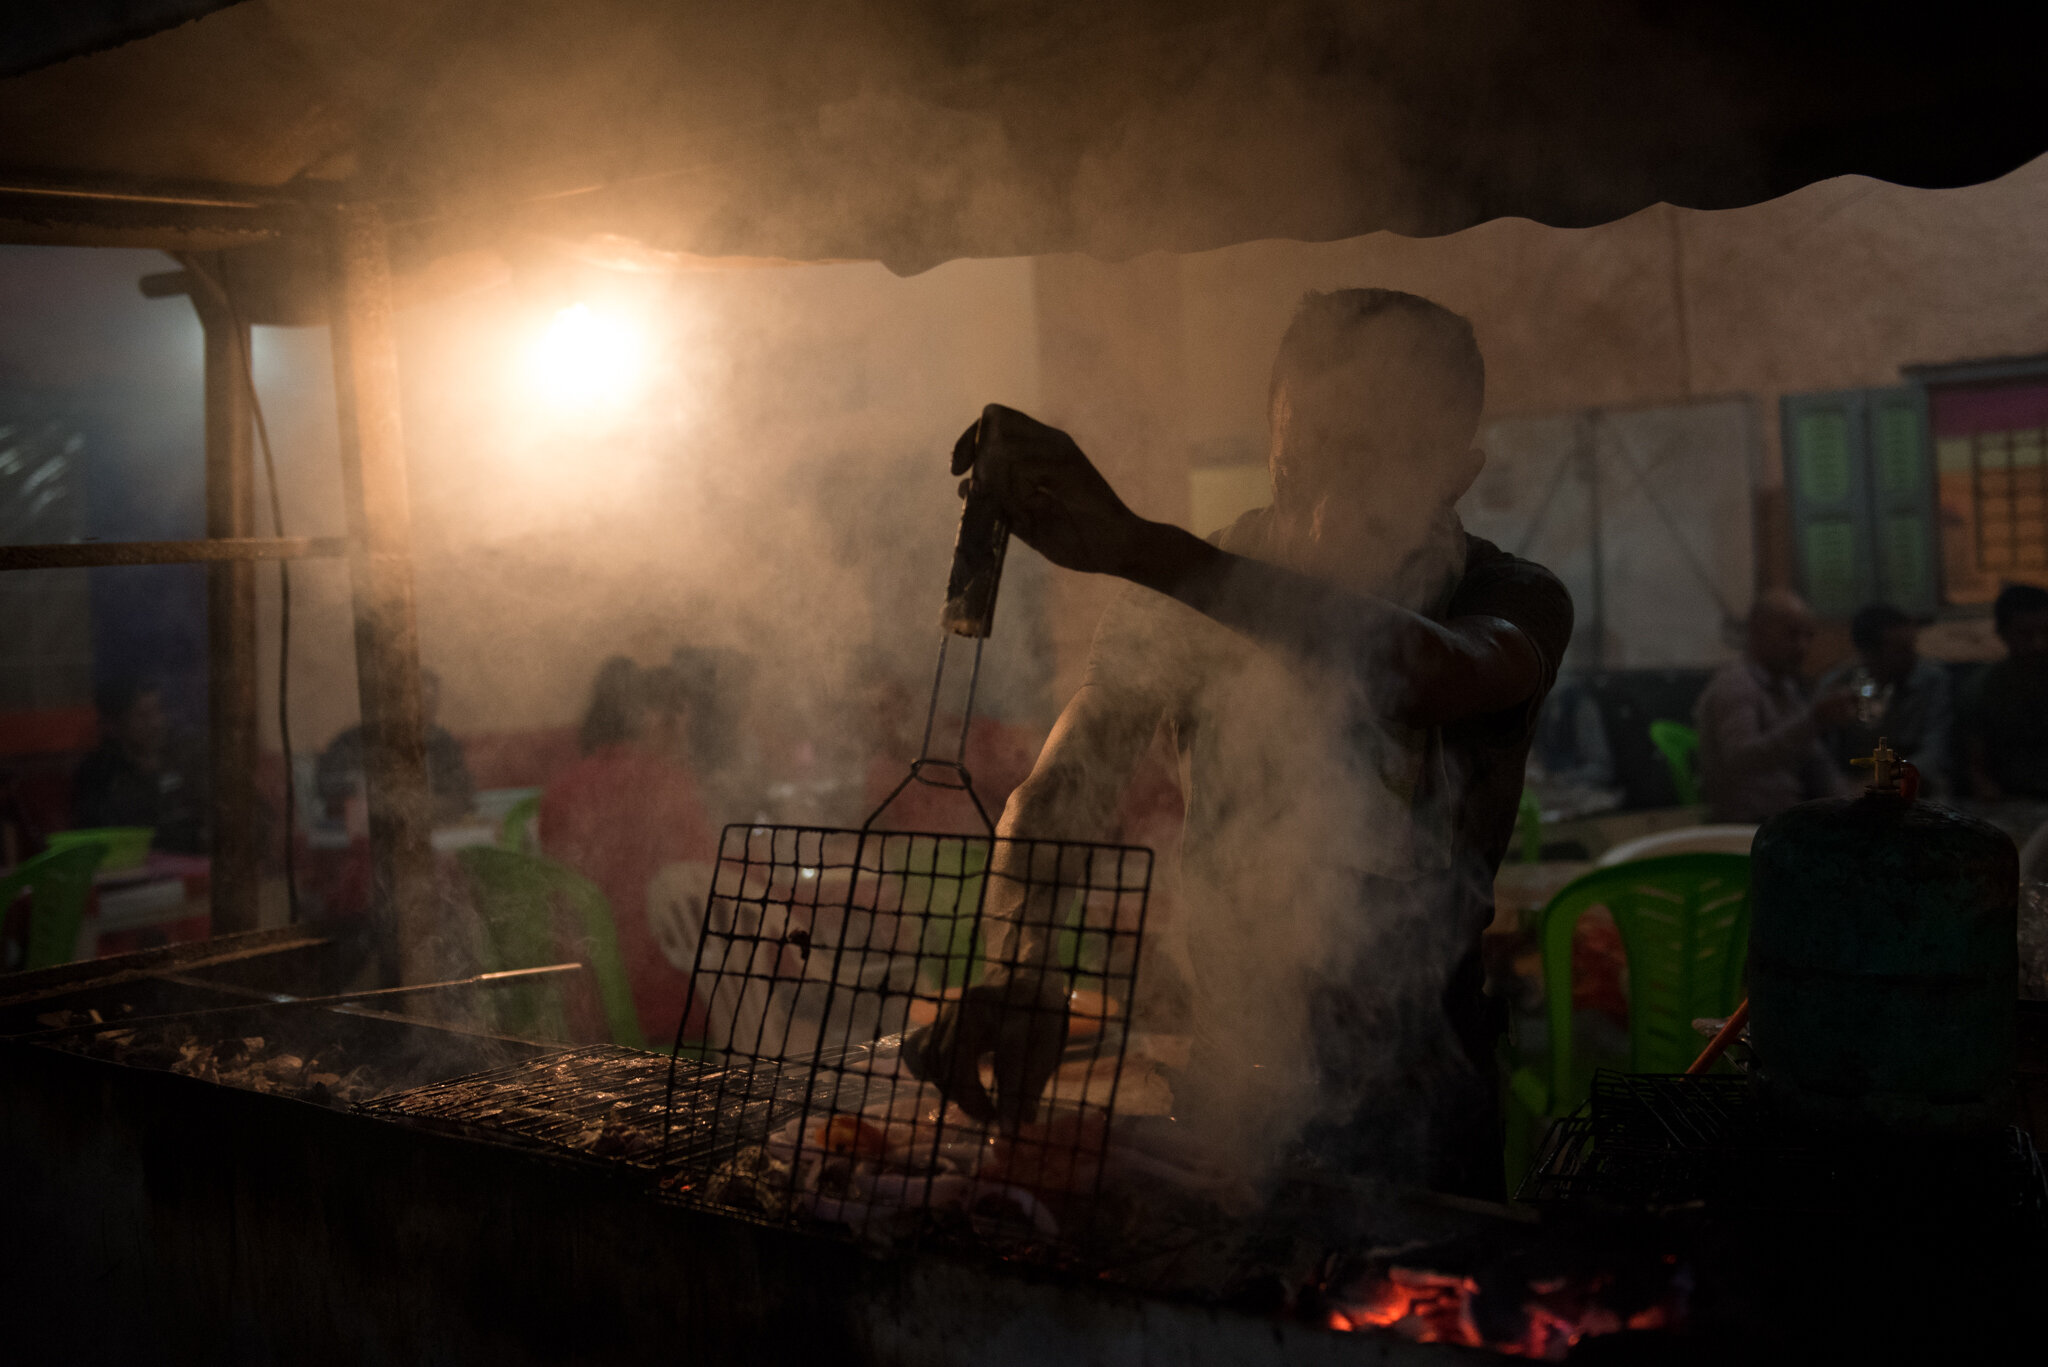    Morocco - Imilchil      Man grilling lamb at night. Local cafe 